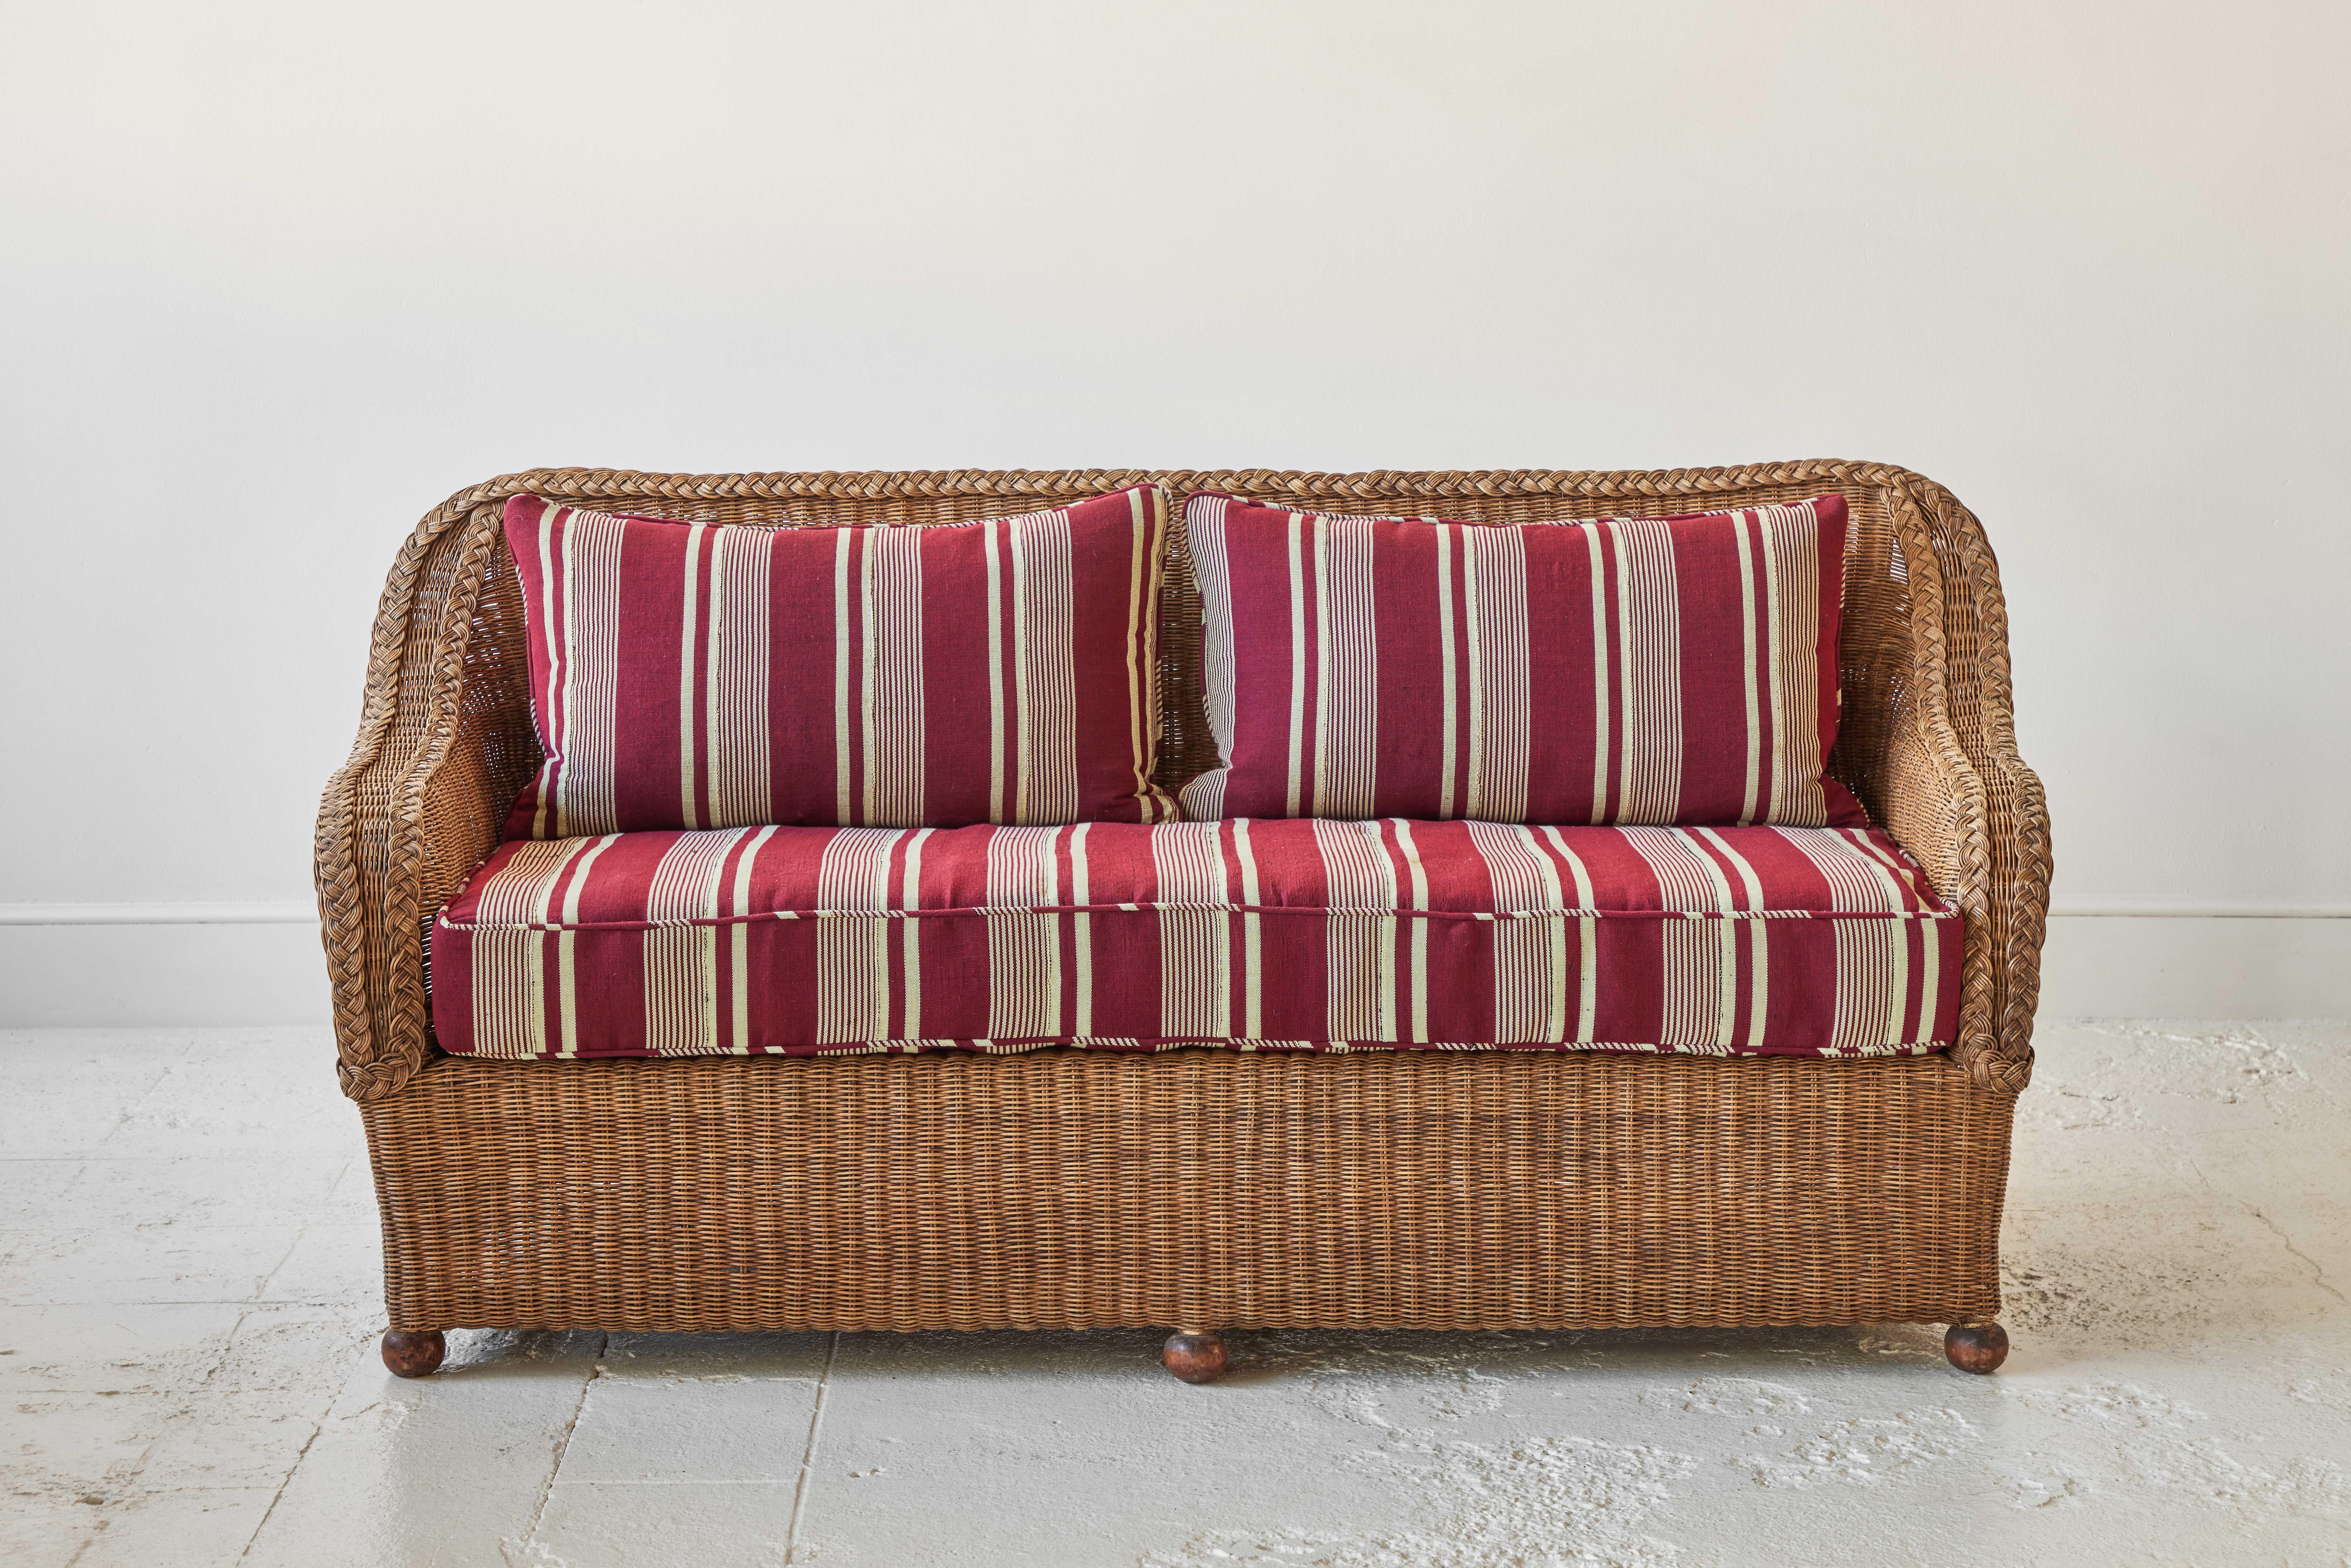 Vintage intricately detailed wicker sofa with six ball feet. The sofa has been newly upholstered in an African striped textile.